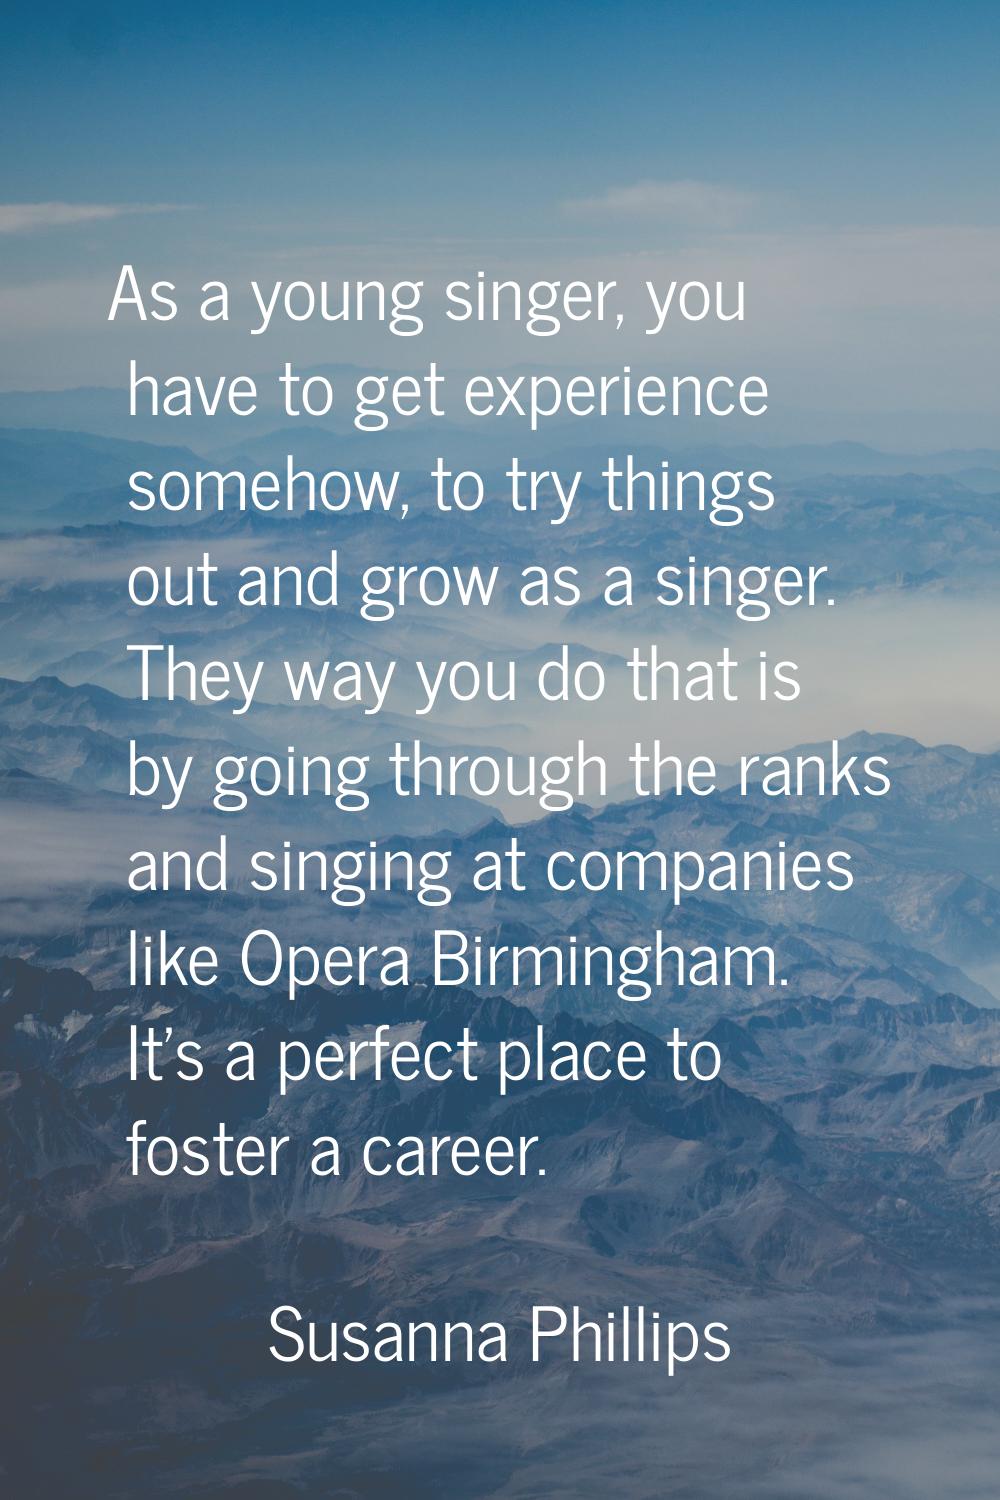 As a young singer, you have to get experience somehow, to try things out and grow as a singer. They